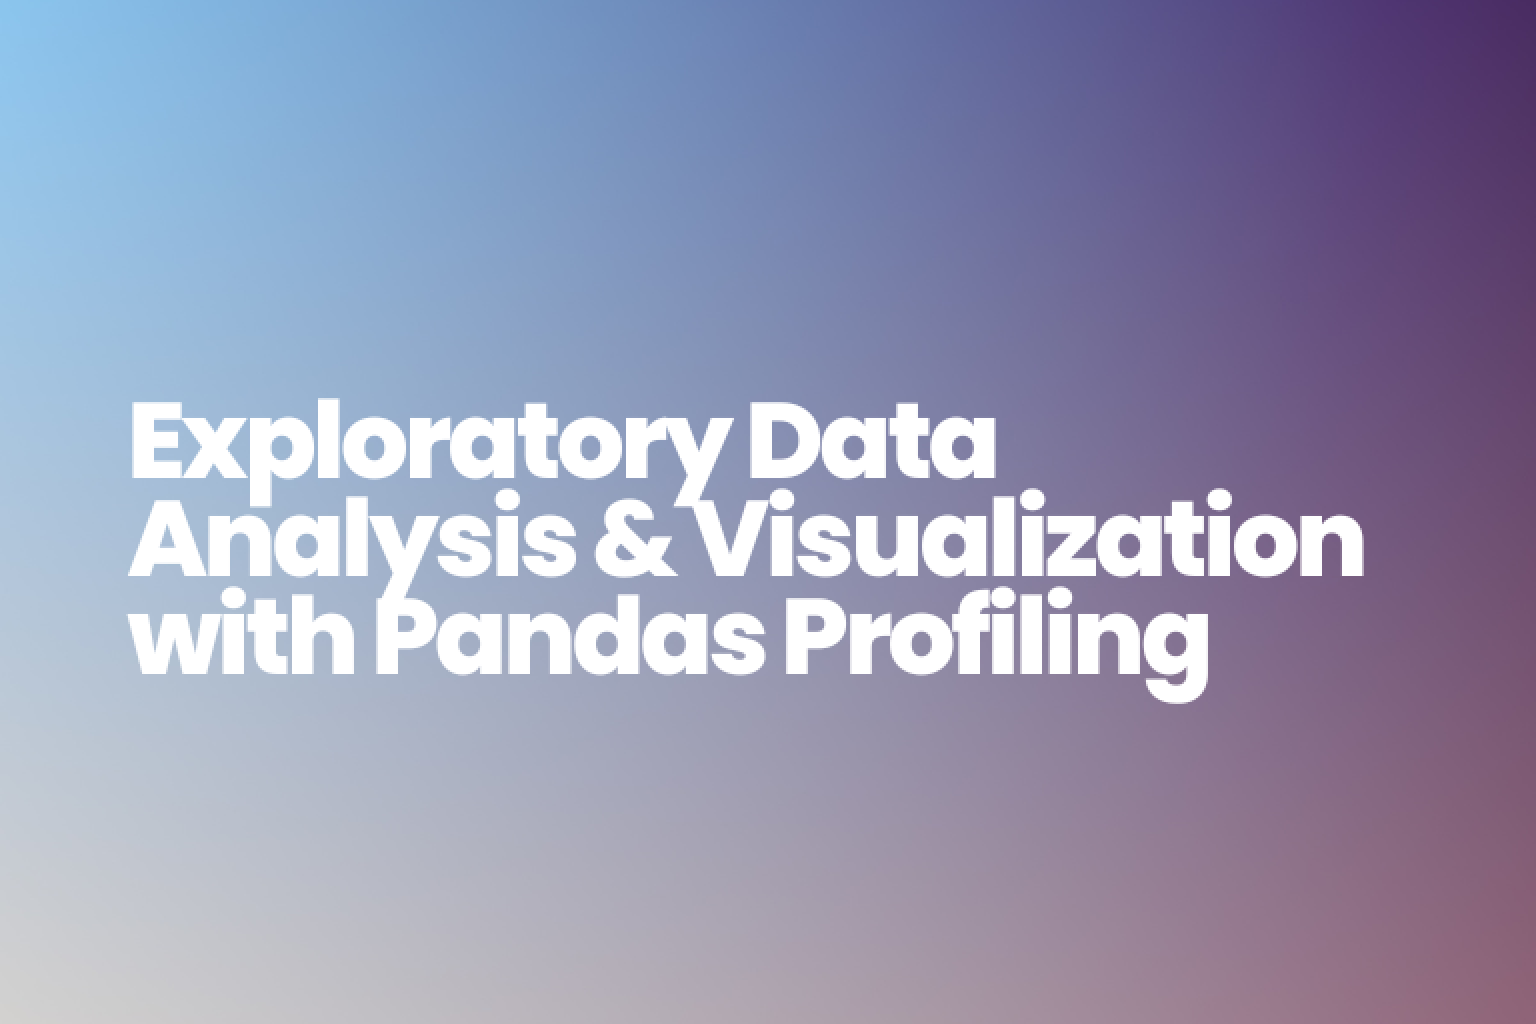 Learn how to perform Exploratory Data Analysis in Python using Pandas Profiling and RATH. Understand the advantages and disadvantages of each method and choose the best one for your data science workflow.